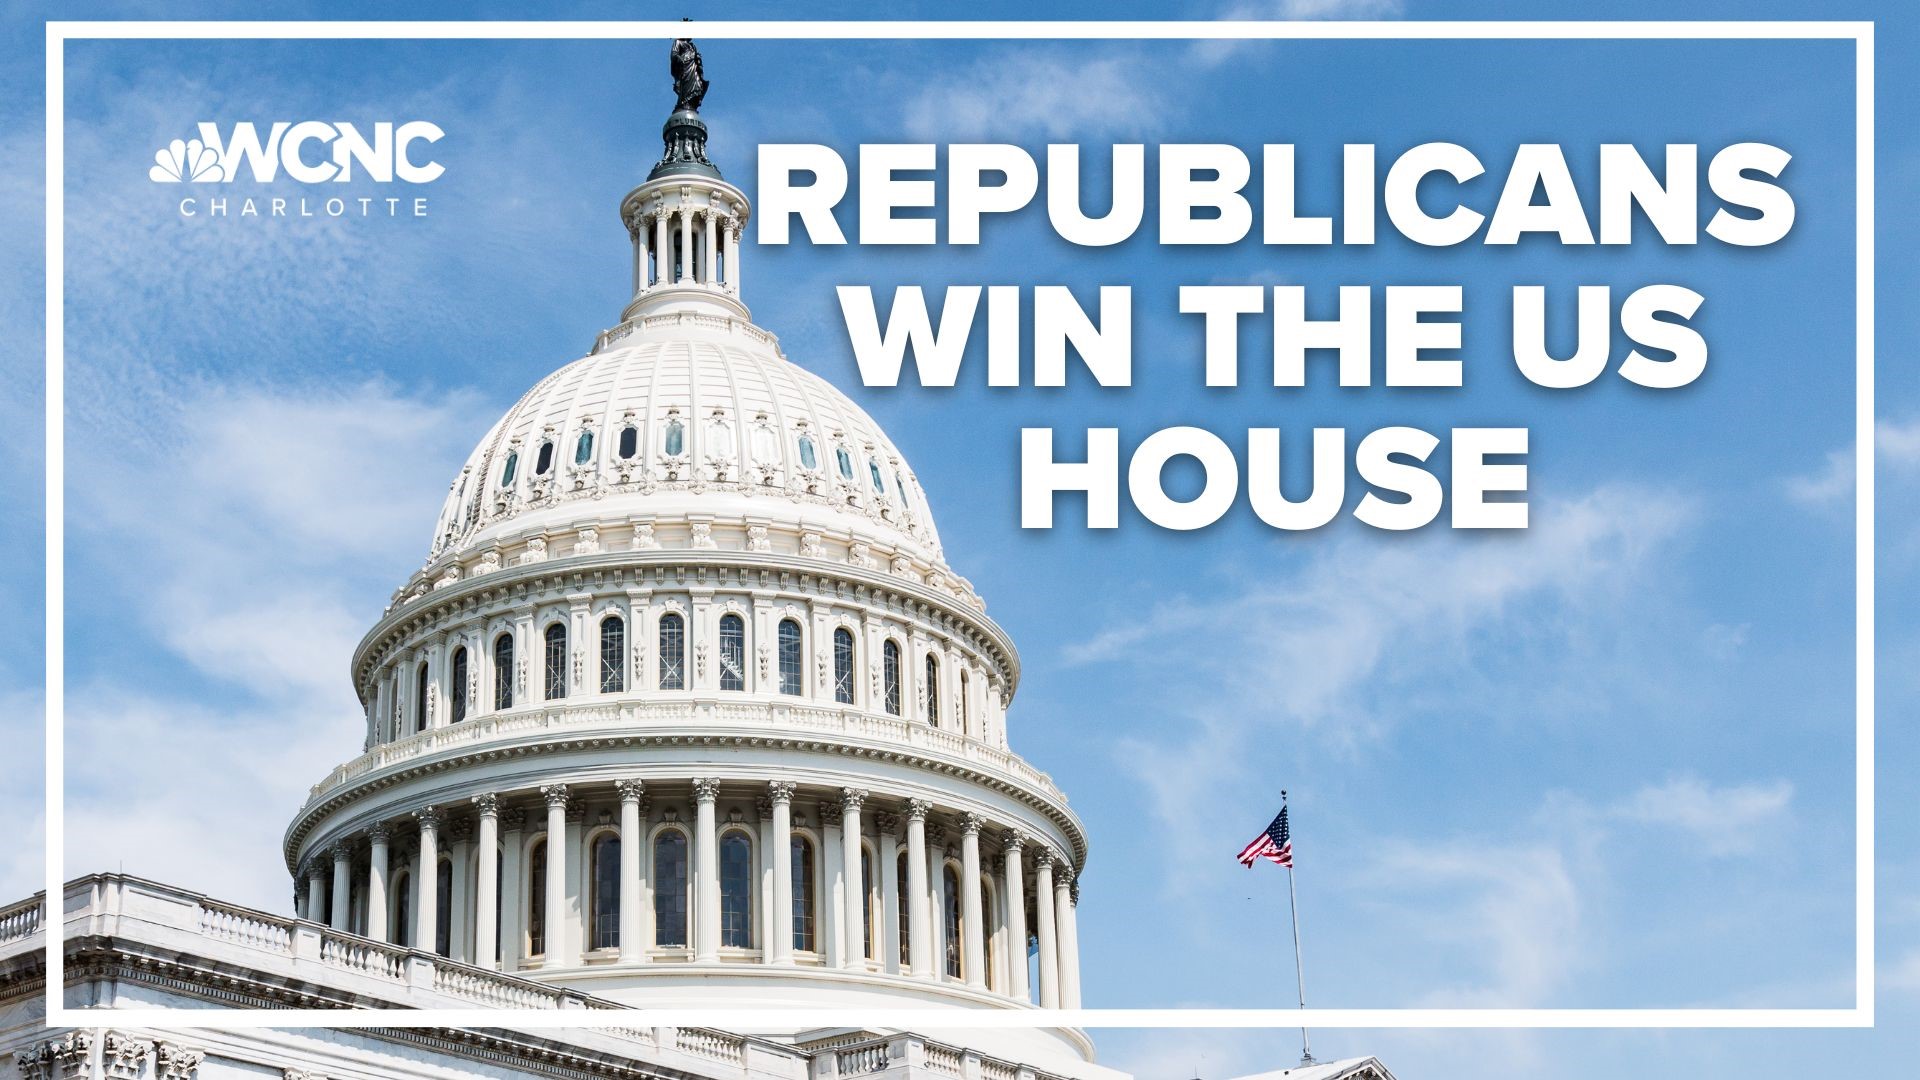 Republicans won control of the U.S. House Wednesday, returning the party to power giving conservatives leverage against President Joe Biden's agenda.